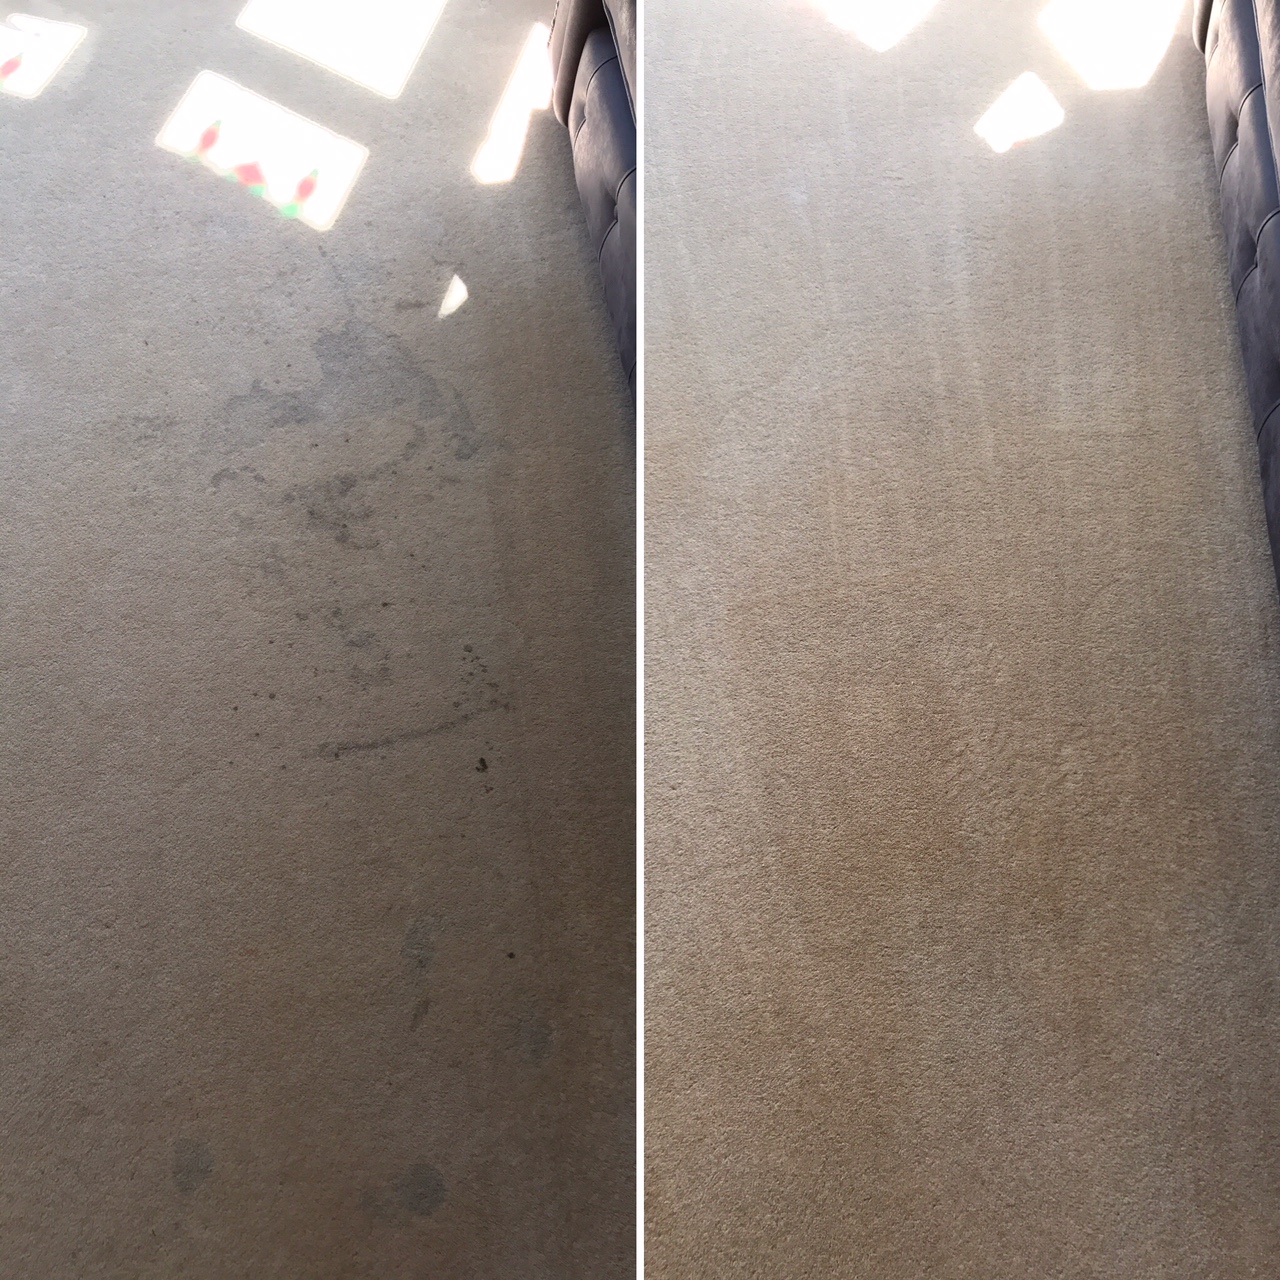 Carpet cleaning before and after